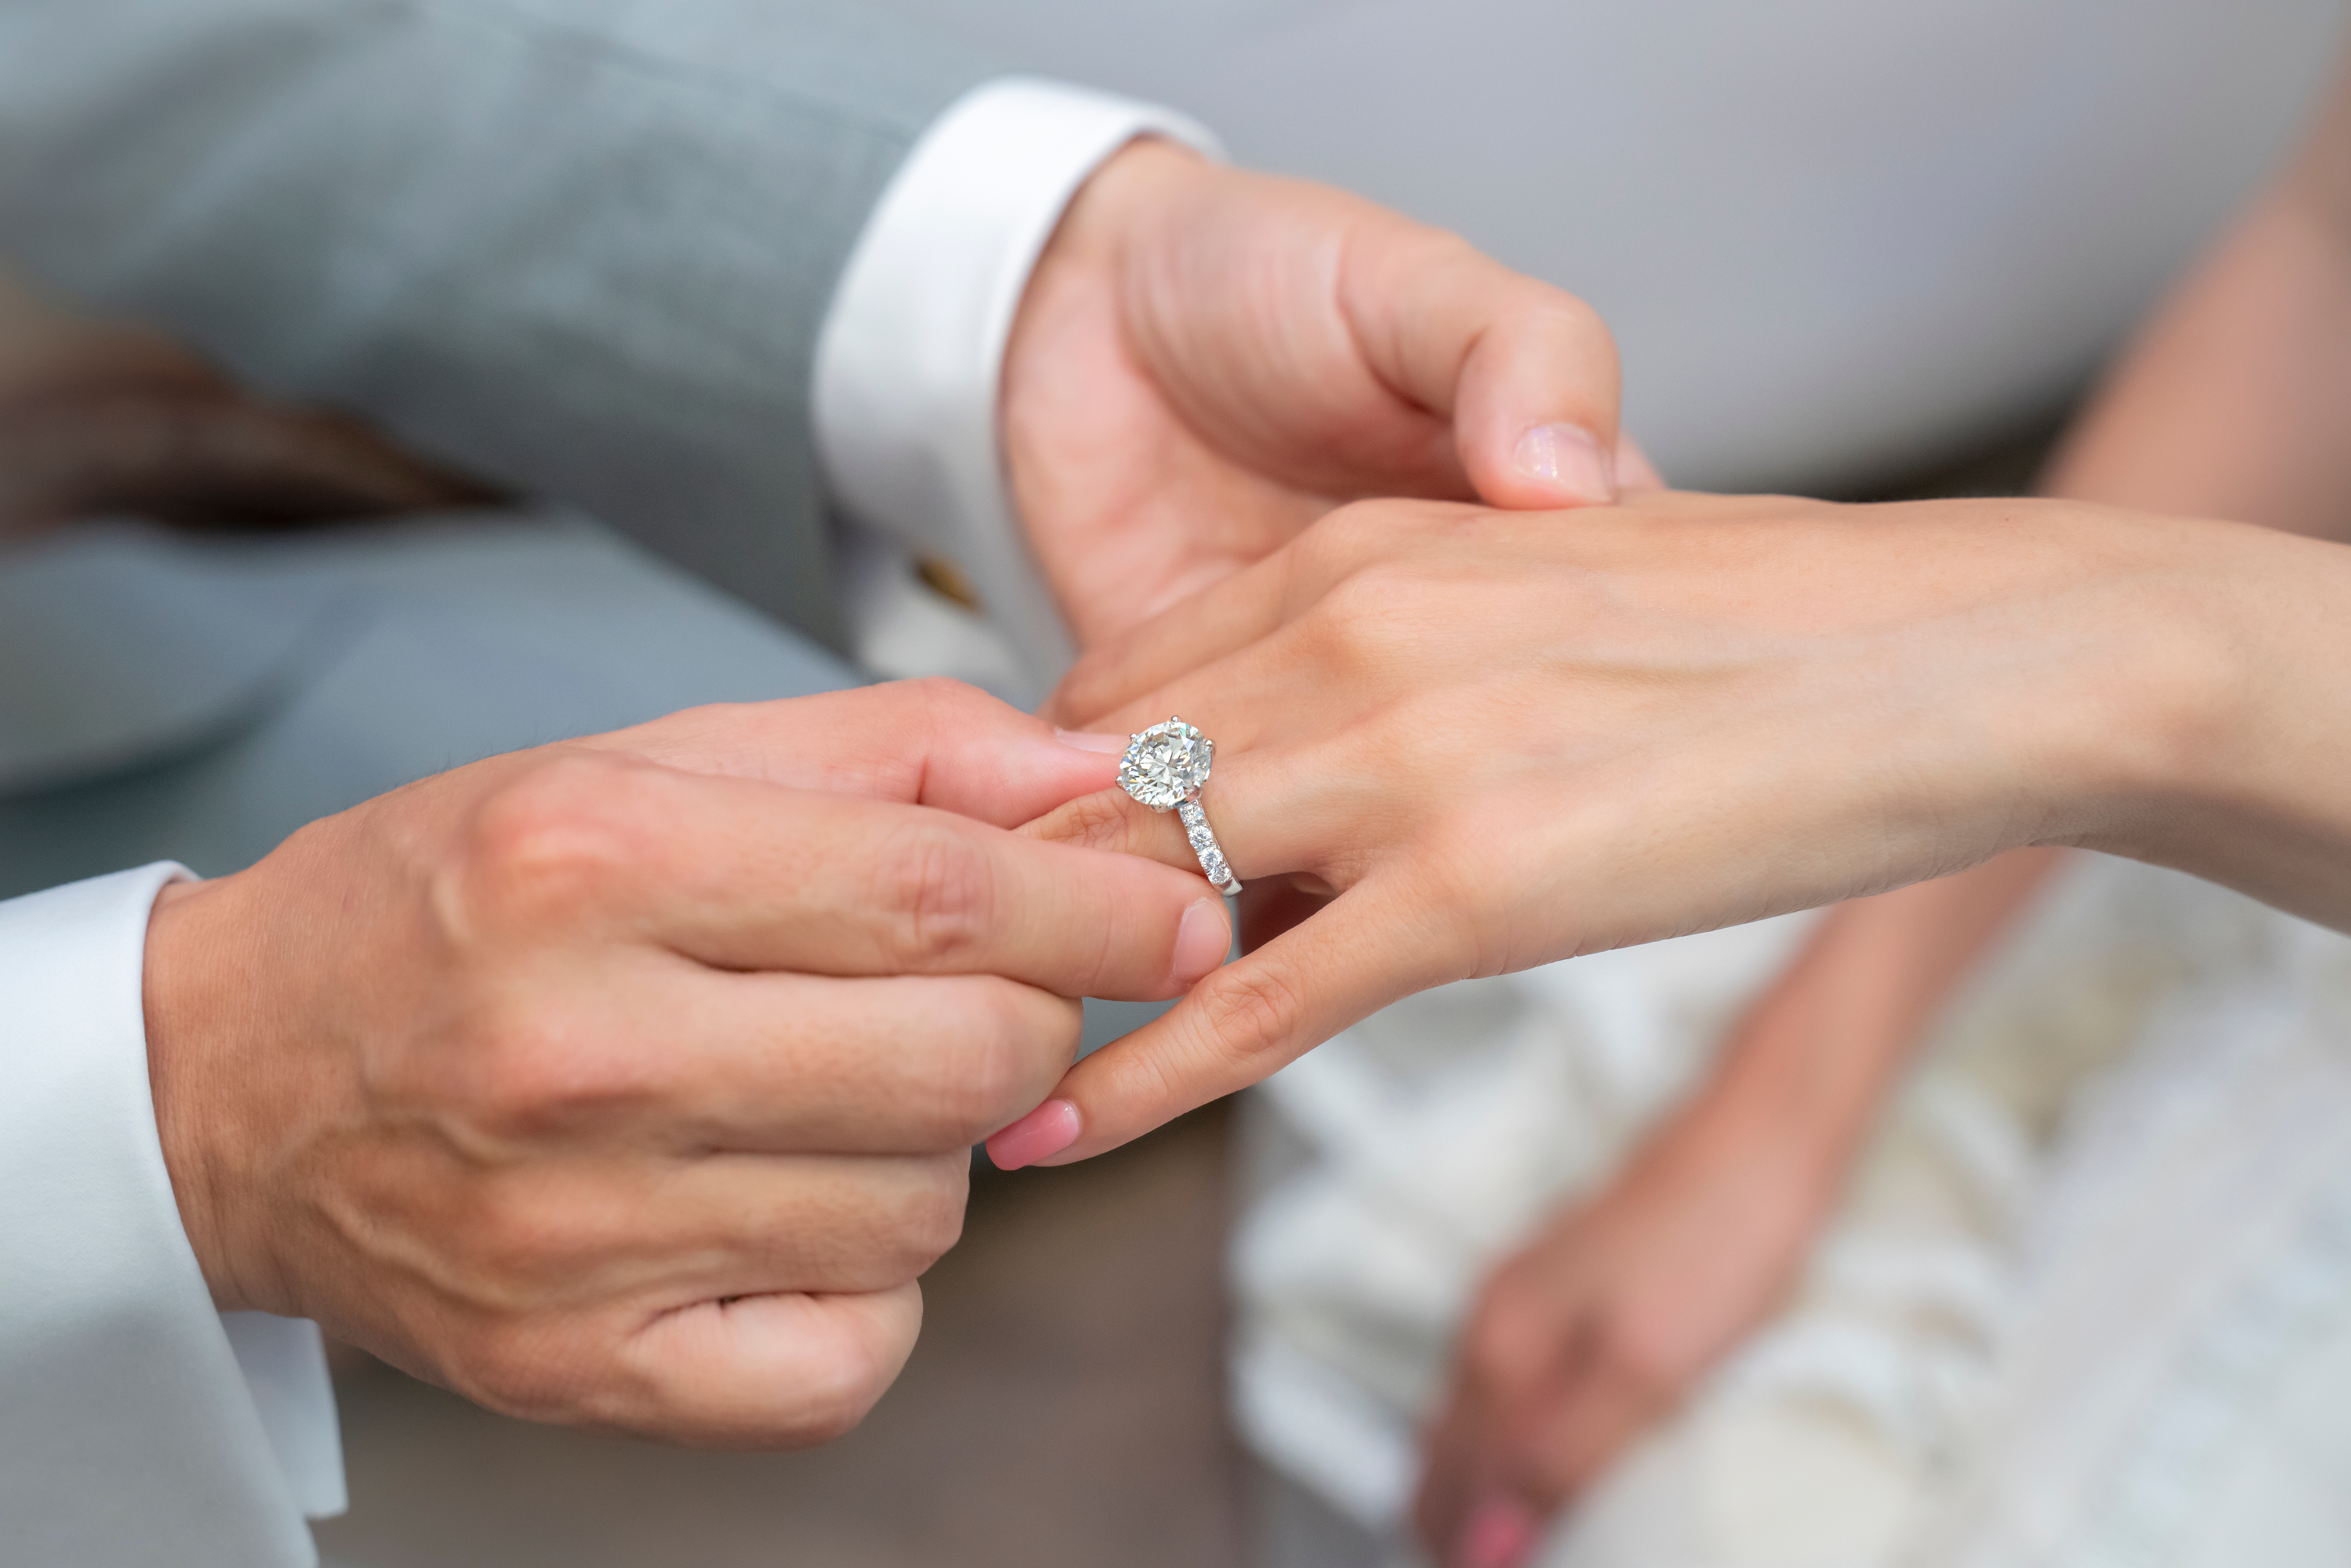 Engagement Rings- Best Tips For Finding The Right One